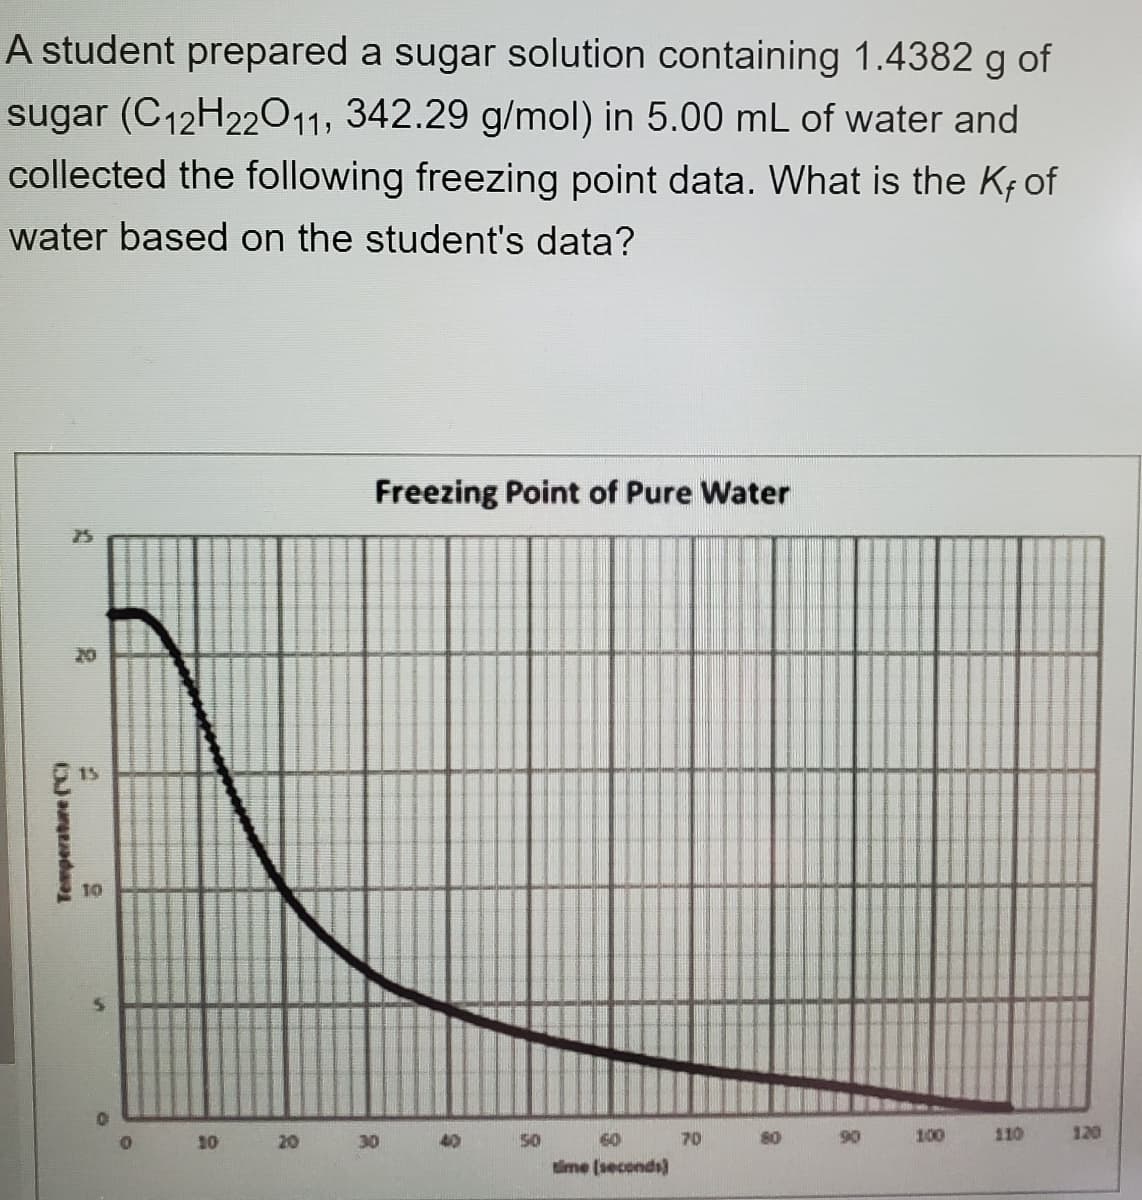 A student prepared a sugar solution containing 1.4382 g of
sugar (C12H22011, 342.29 g/mol) in 5.00 mL of water and
collected the following freezing point data. What is the Kfof
water based on the student's data?
Freezing Point of Pure Water
75
20
15
10
10 20
30
40
50
60
70
80
100
110
120
time (seconds)
